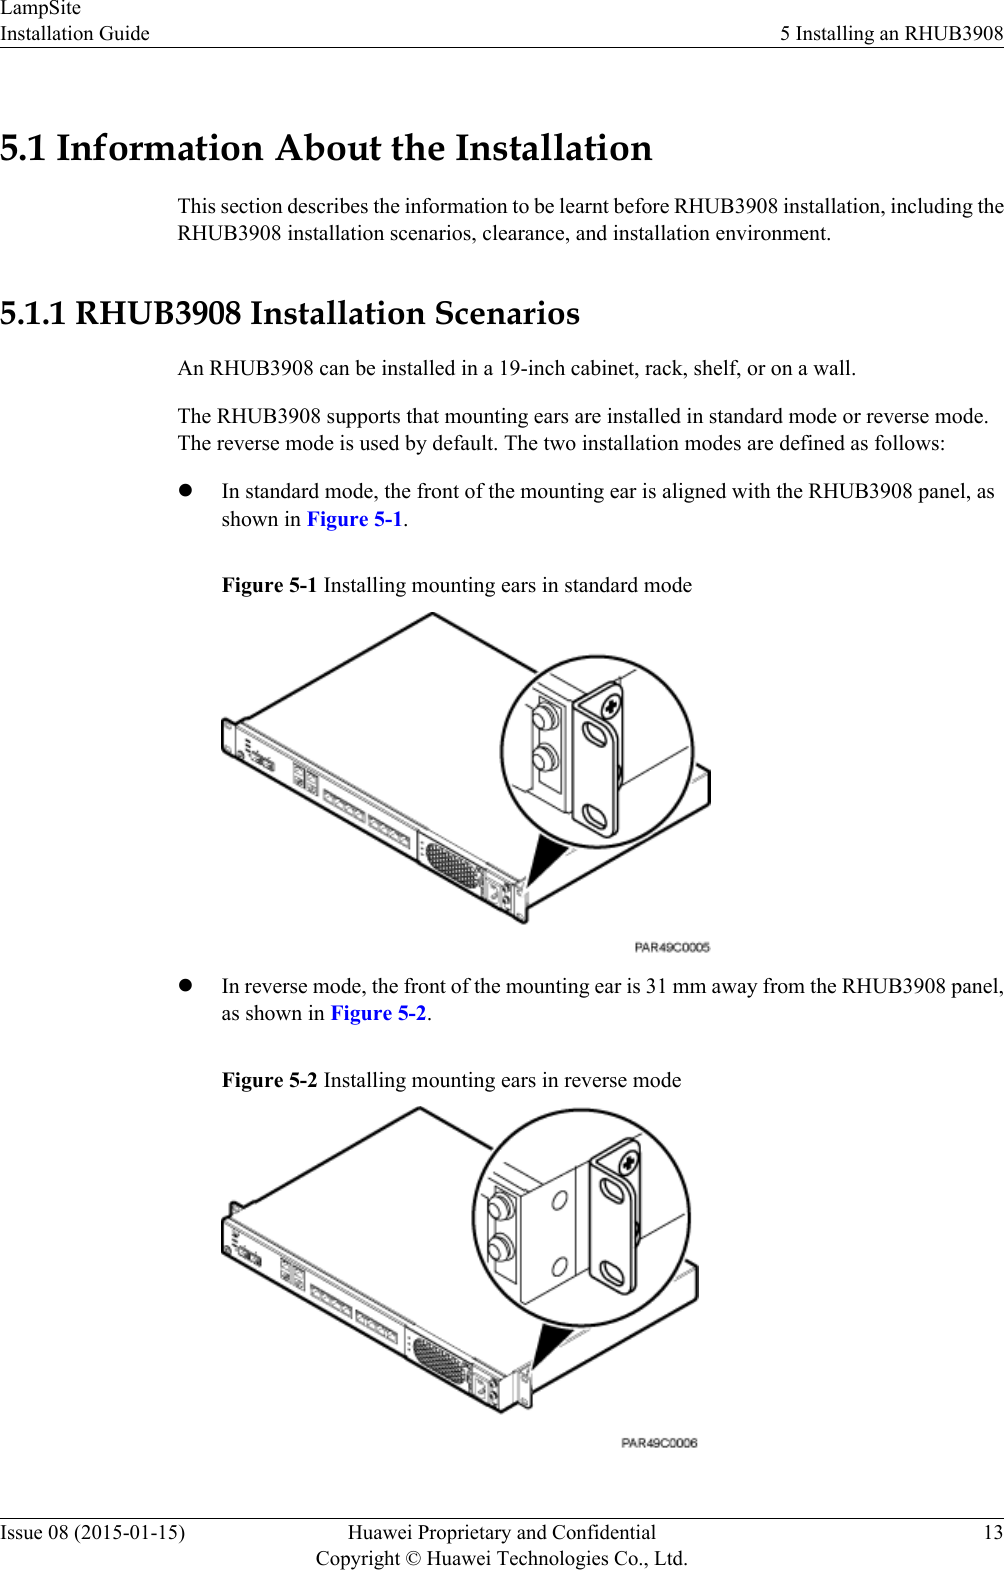 5.1 Information About the InstallationThis section describes the information to be learnt before RHUB3908 installation, including theRHUB3908 installation scenarios, clearance, and installation environment.5.1.1 RHUB3908 Installation ScenariosAn RHUB3908 can be installed in a 19-inch cabinet, rack, shelf, or on a wall.The RHUB3908 supports that mounting ears are installed in standard mode or reverse mode.The reverse mode is used by default. The two installation modes are defined as follows:lIn standard mode, the front of the mounting ear is aligned with the RHUB3908 panel, asshown in Figure 5-1.Figure 5-1 Installing mounting ears in standard modelIn reverse mode, the front of the mounting ear is 31 mm away from the RHUB3908 panel,as shown in Figure 5-2.Figure 5-2 Installing mounting ears in reverse modeLampSiteInstallation Guide 5 Installing an RHUB3908Issue 08 (2015-01-15) Huawei Proprietary and ConfidentialCopyright © Huawei Technologies Co., Ltd.13